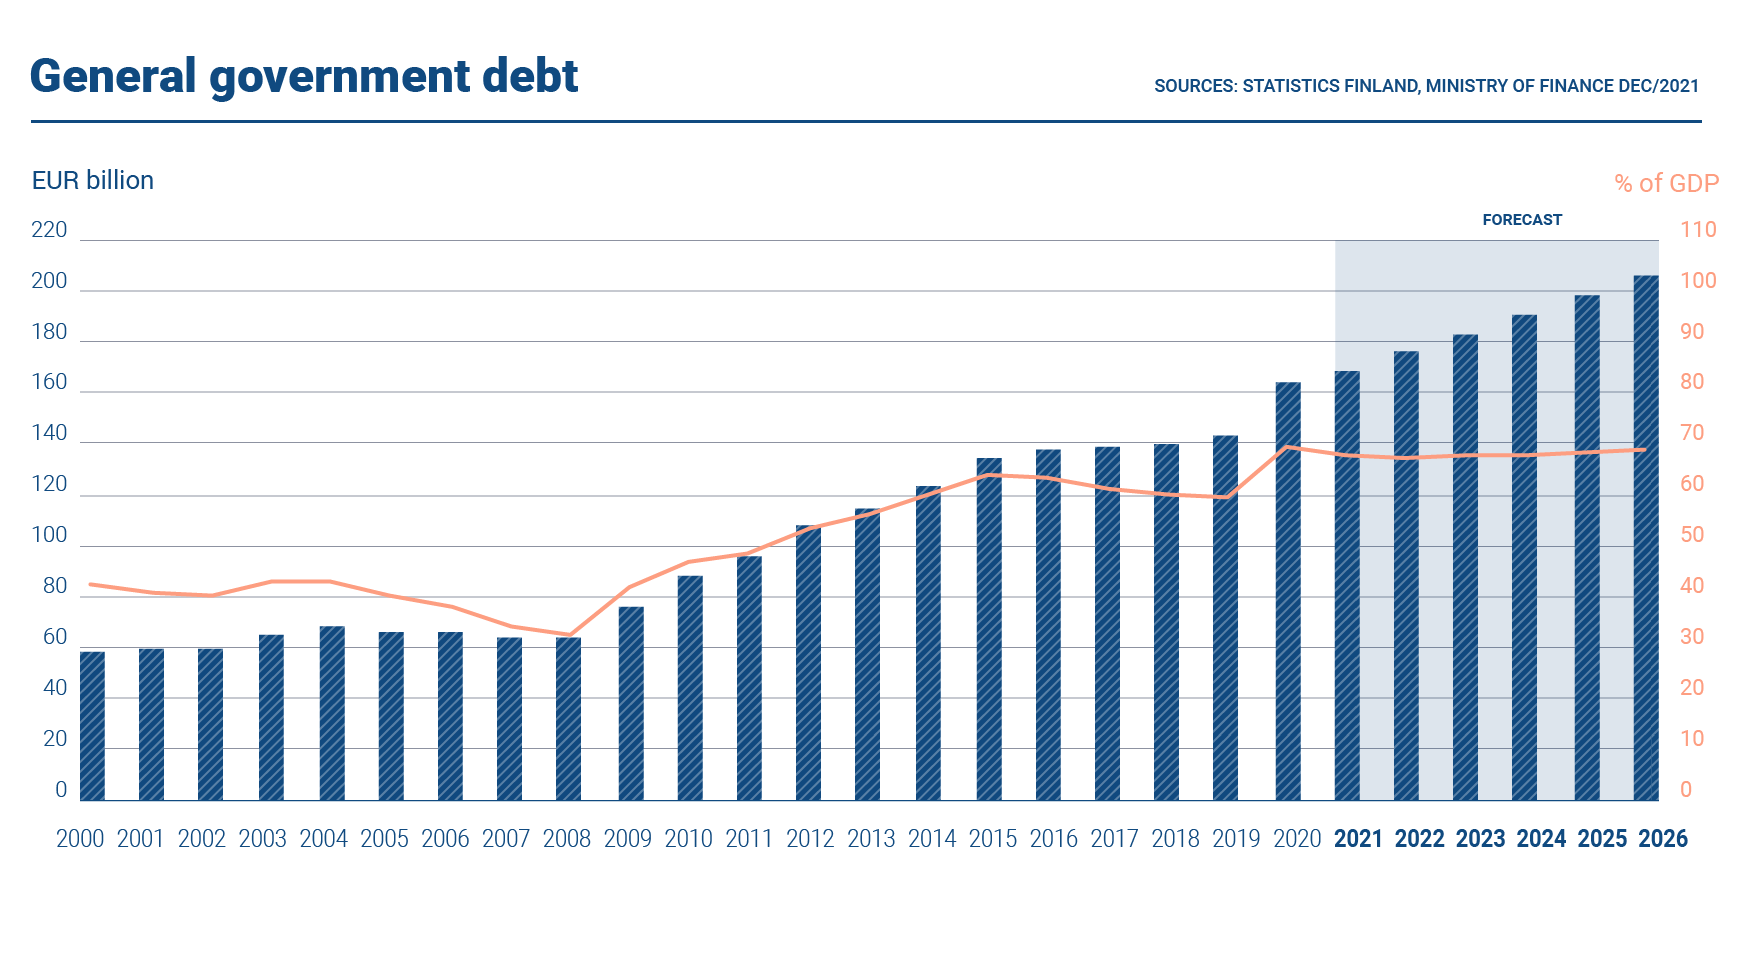 The graph shows the volume of Finland's general government debt. In 2021, the general government debt was EUR 168.4 billion. The debt-to-GDP ratio was 67.7%.